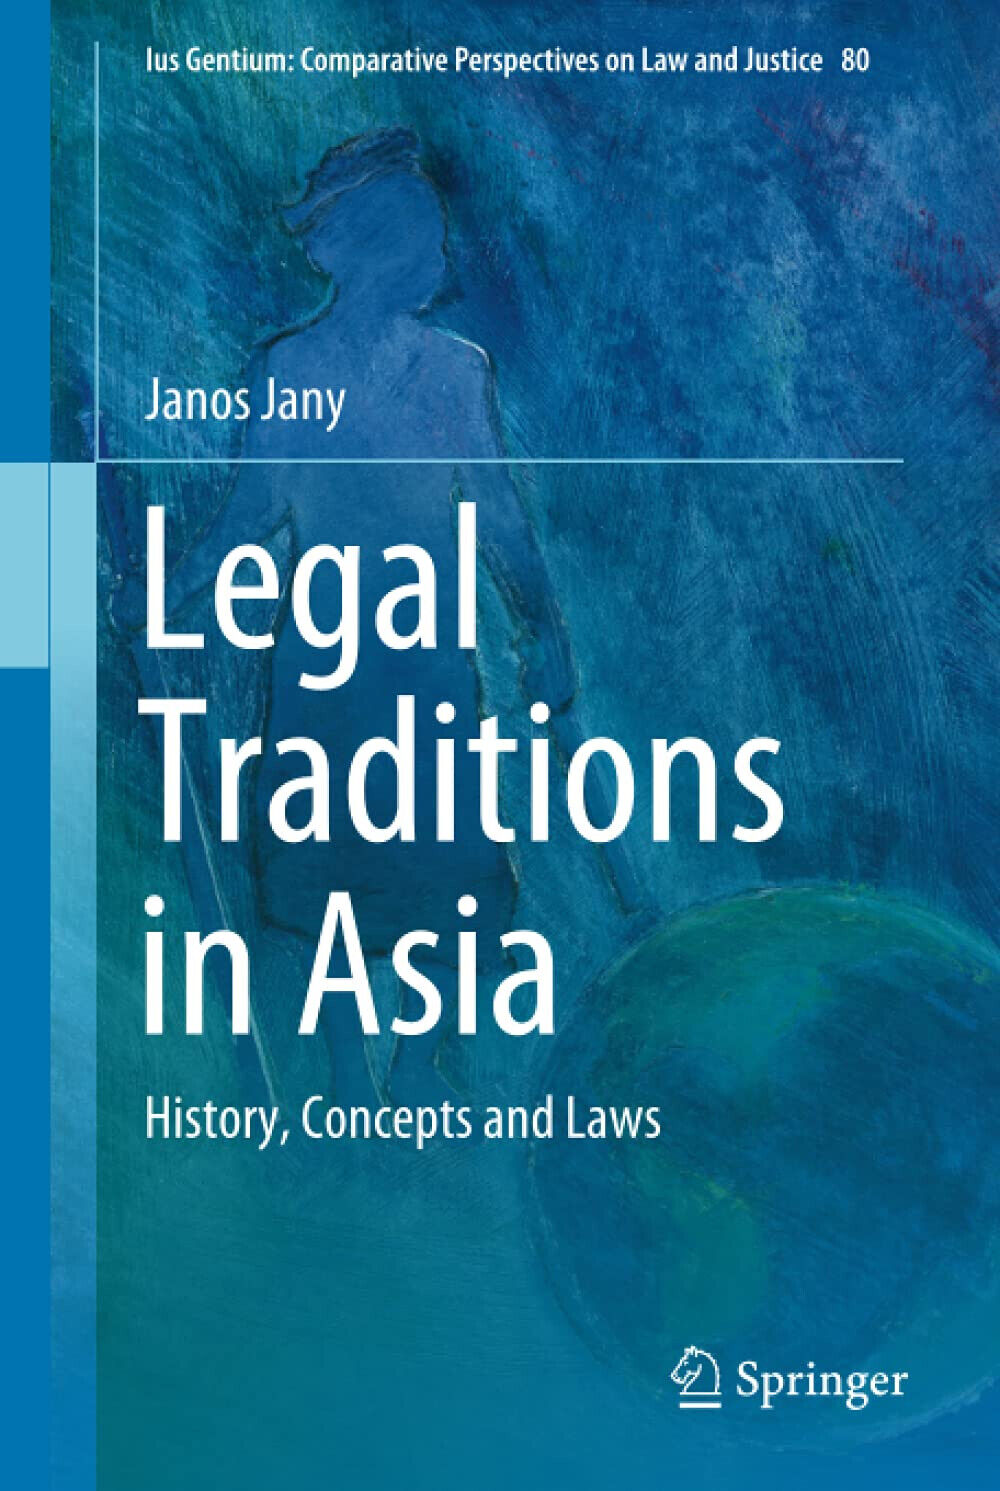 Legal Traditions in Asia - Janos Jany - Springer, 2020 libro usato